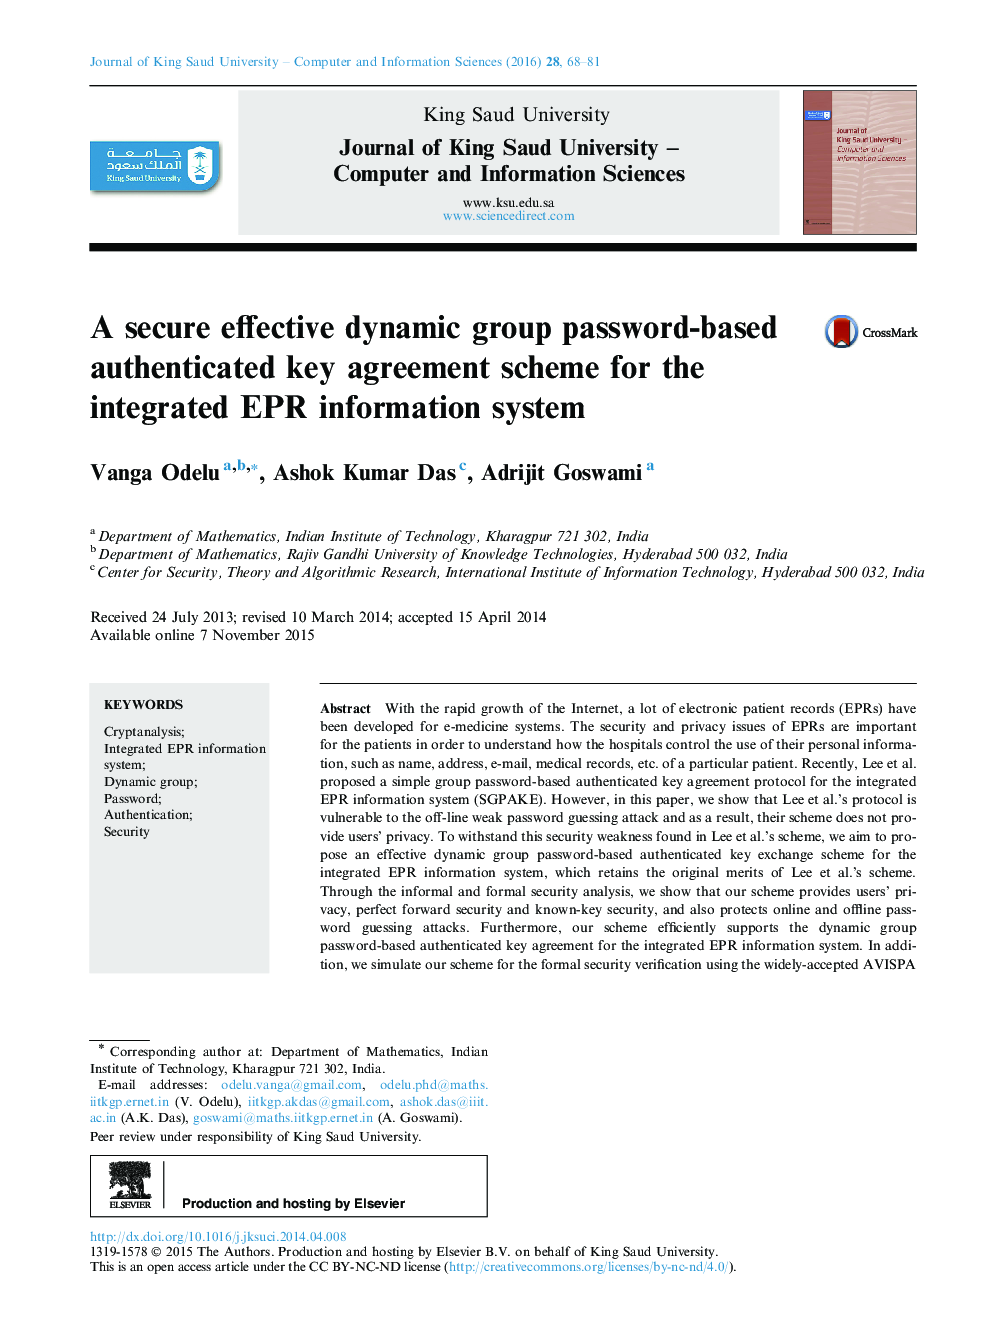 A secure effective dynamic group password-based authenticated key agreement scheme for the integrated EPR information system 